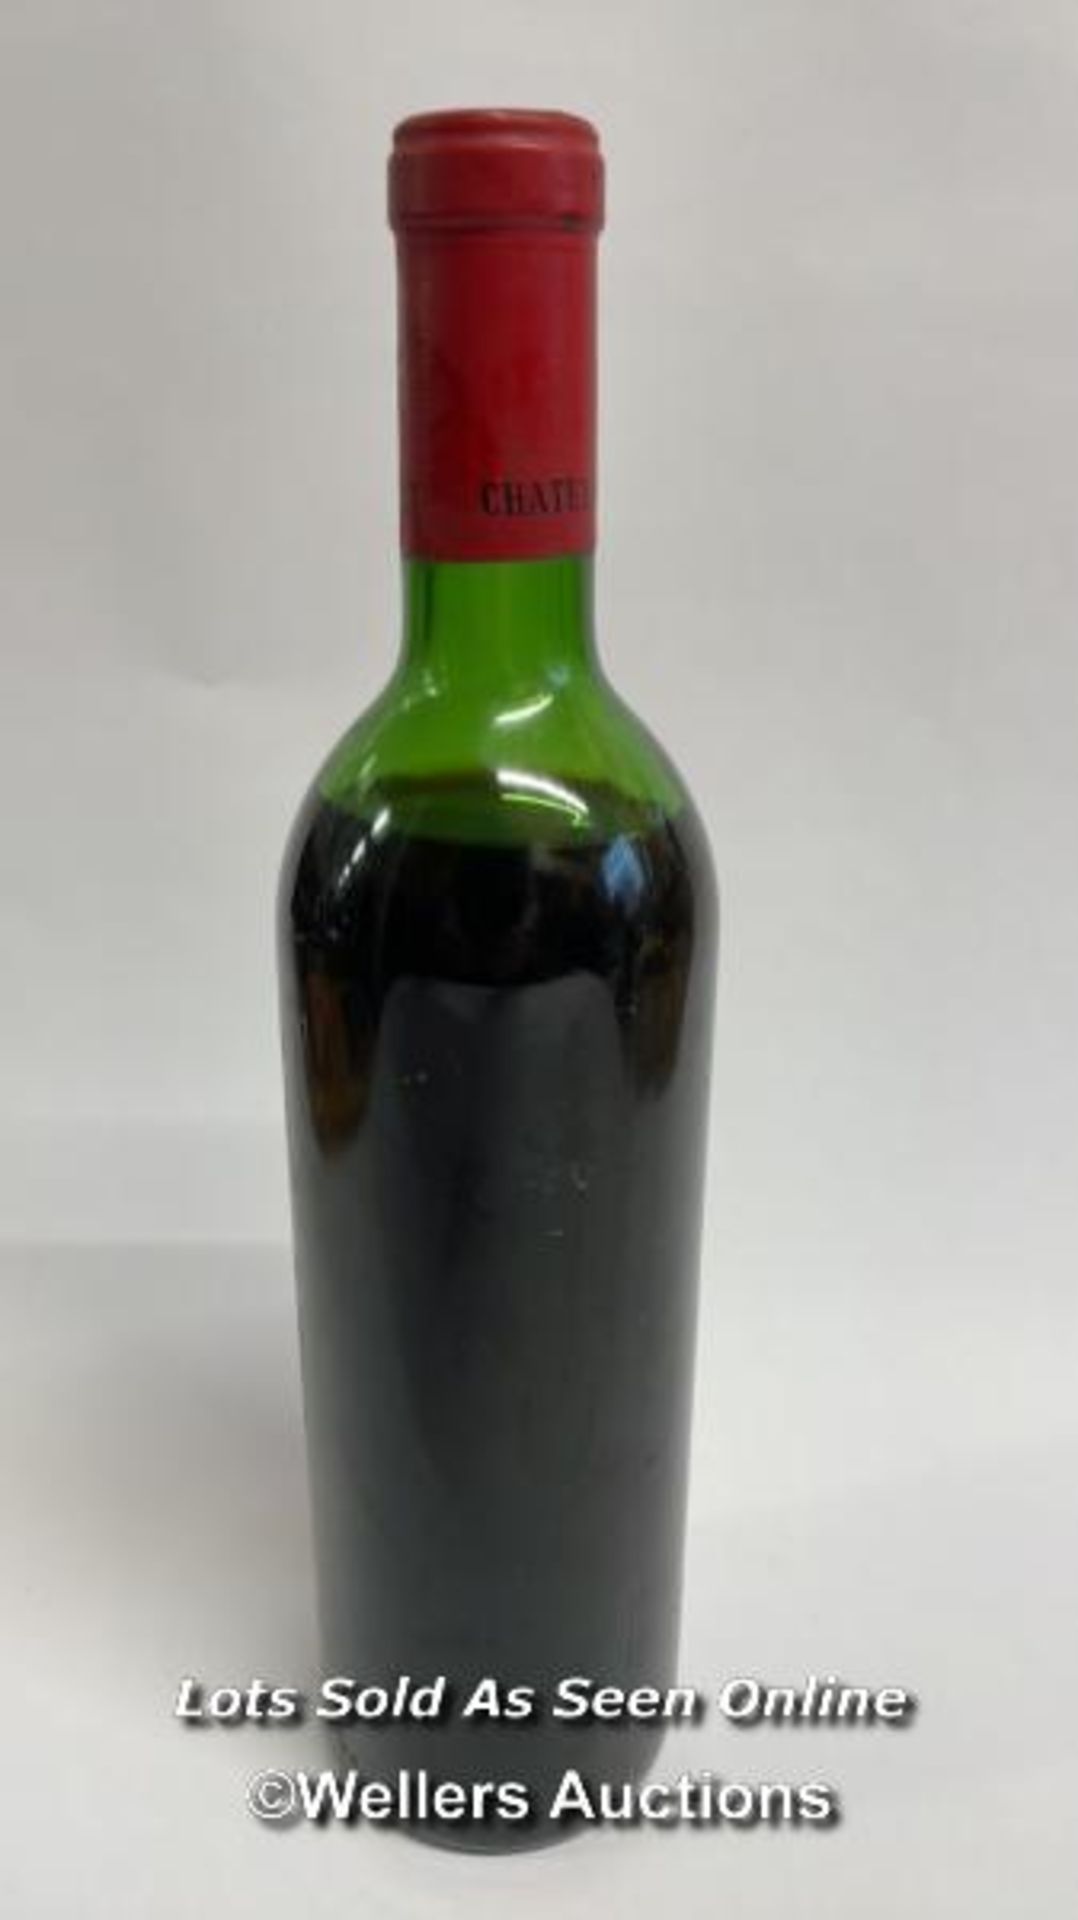 1971 Grand Vin Chateau Latour Premier Cru Bourgeois Medoc, 08349, 75cl / Please see images for - Image 4 of 4